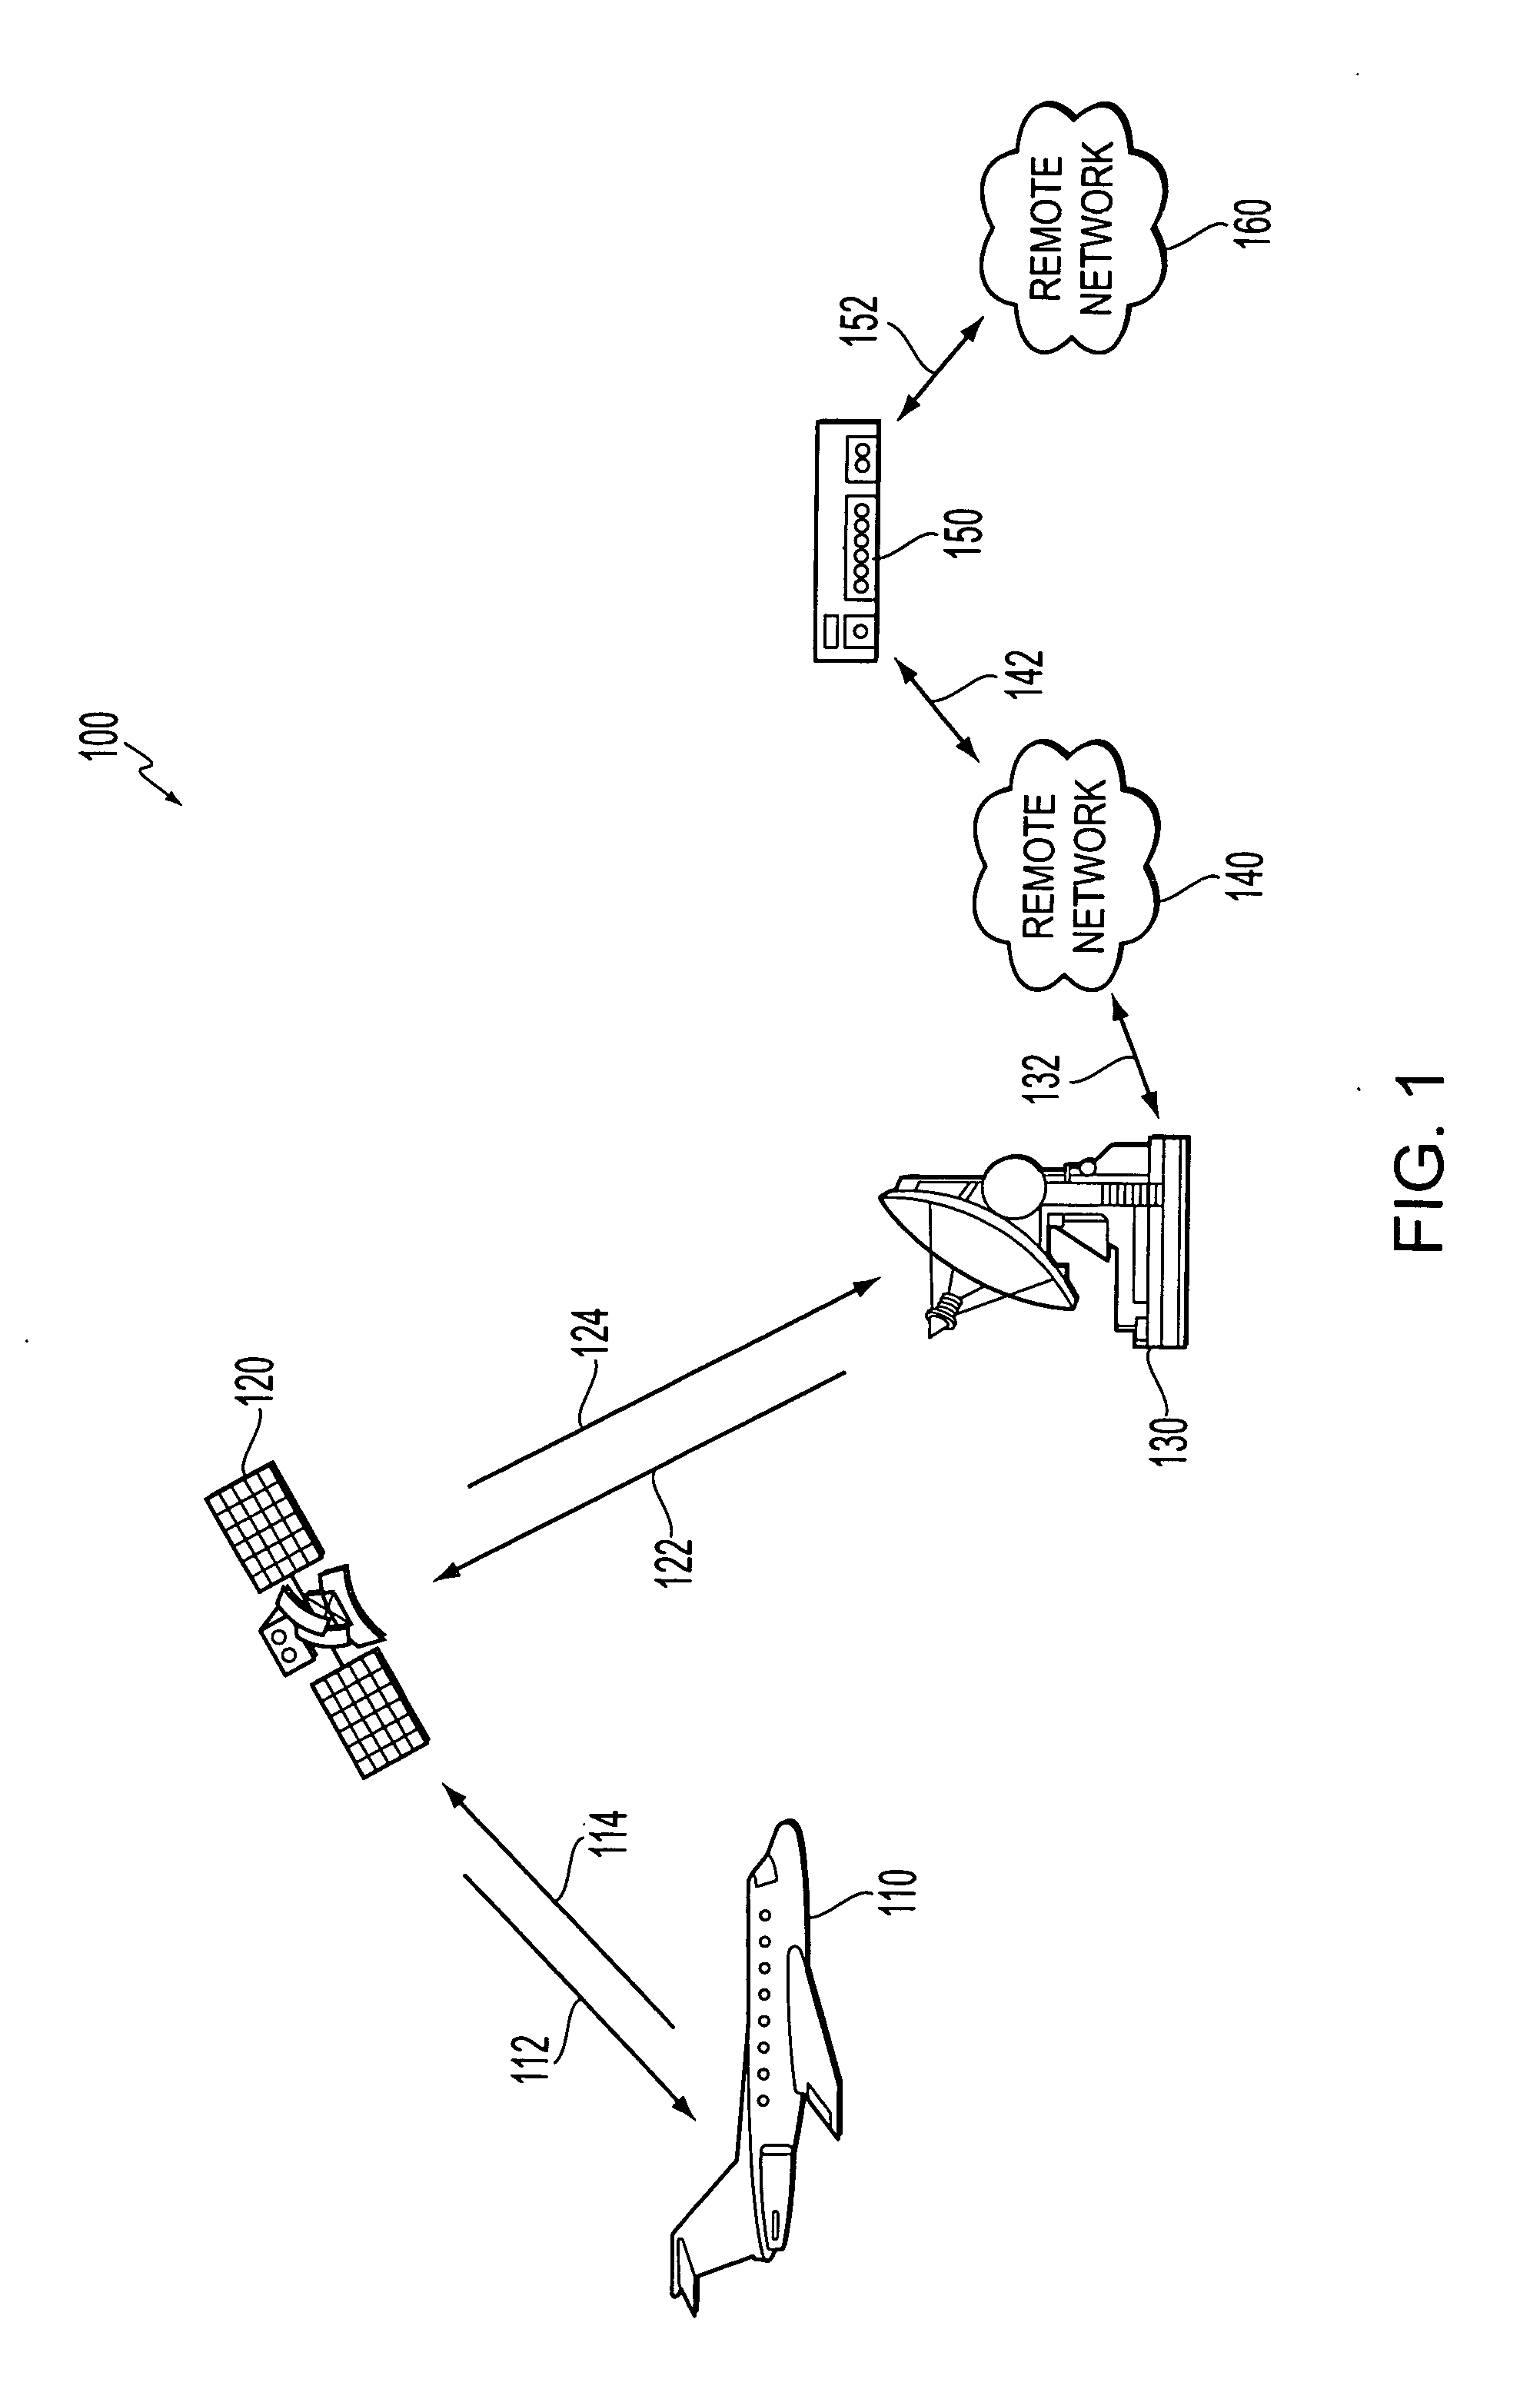 Mobile airborne high-speed broadband communications systems and methods